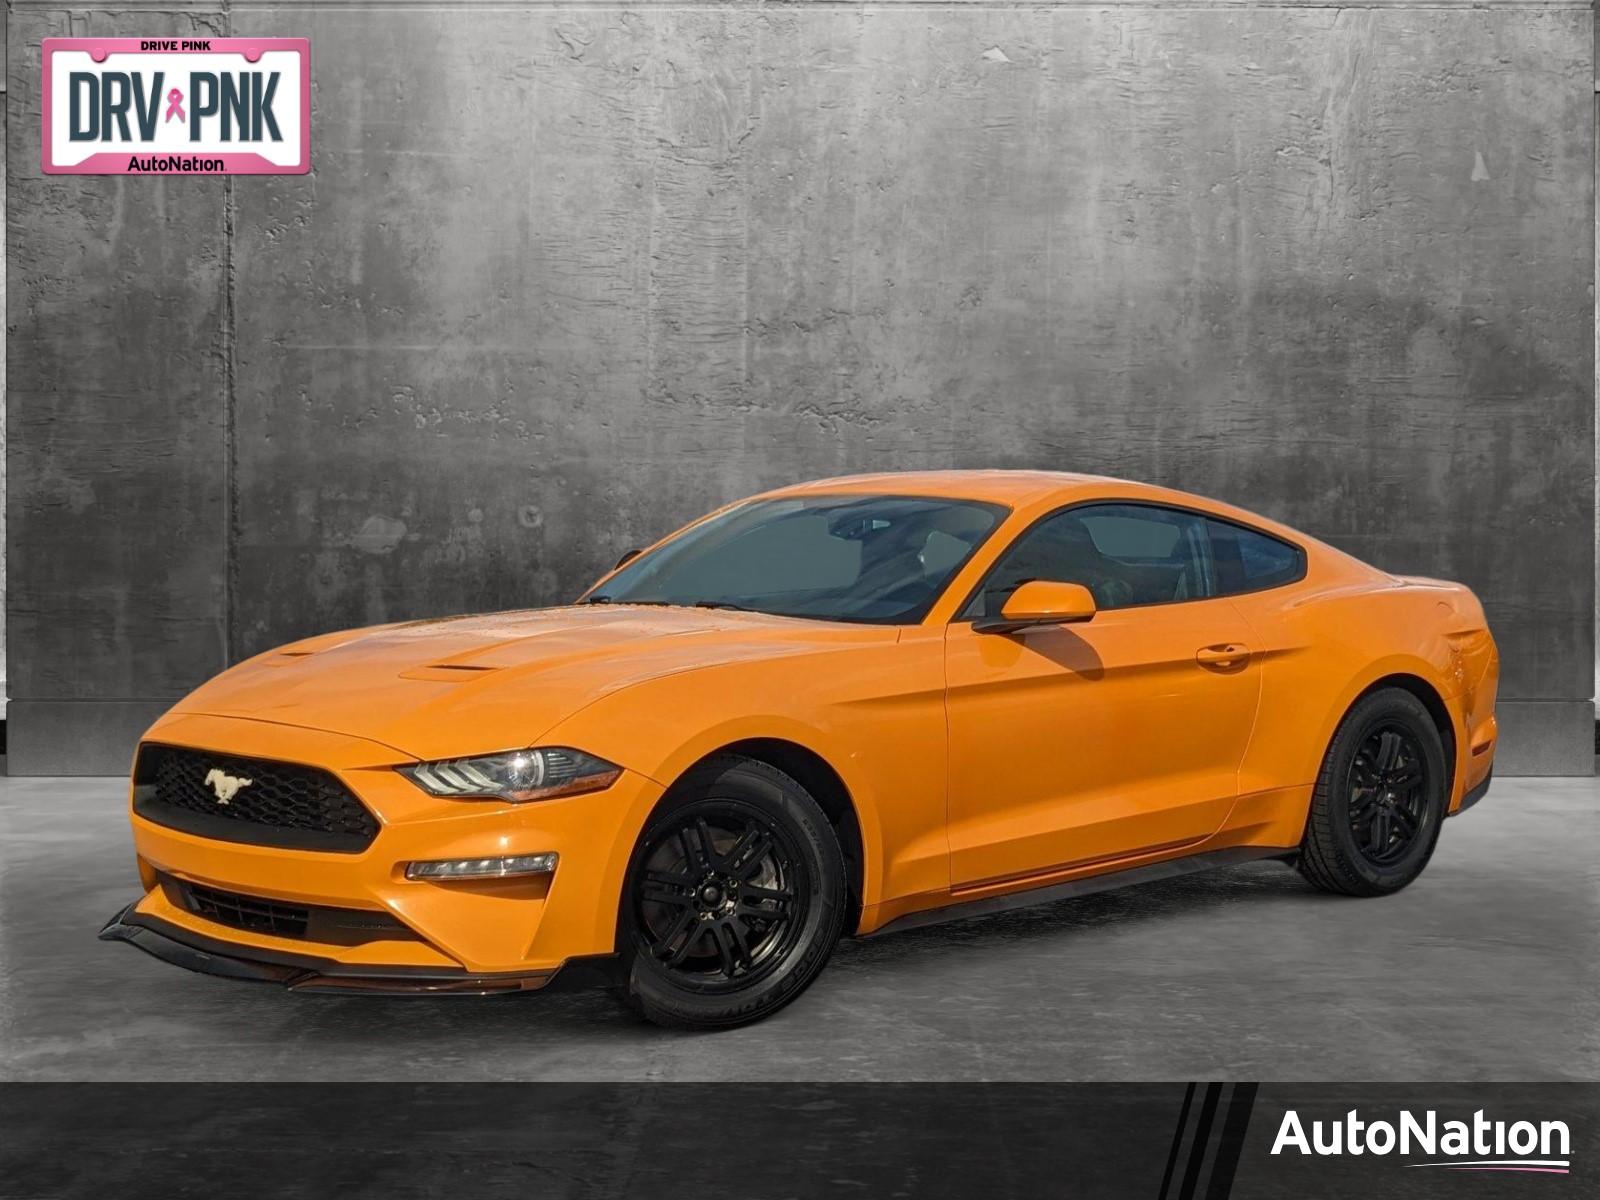 2018 Ford Mustang Vehicle Photo in St. Petersburg, FL 33713